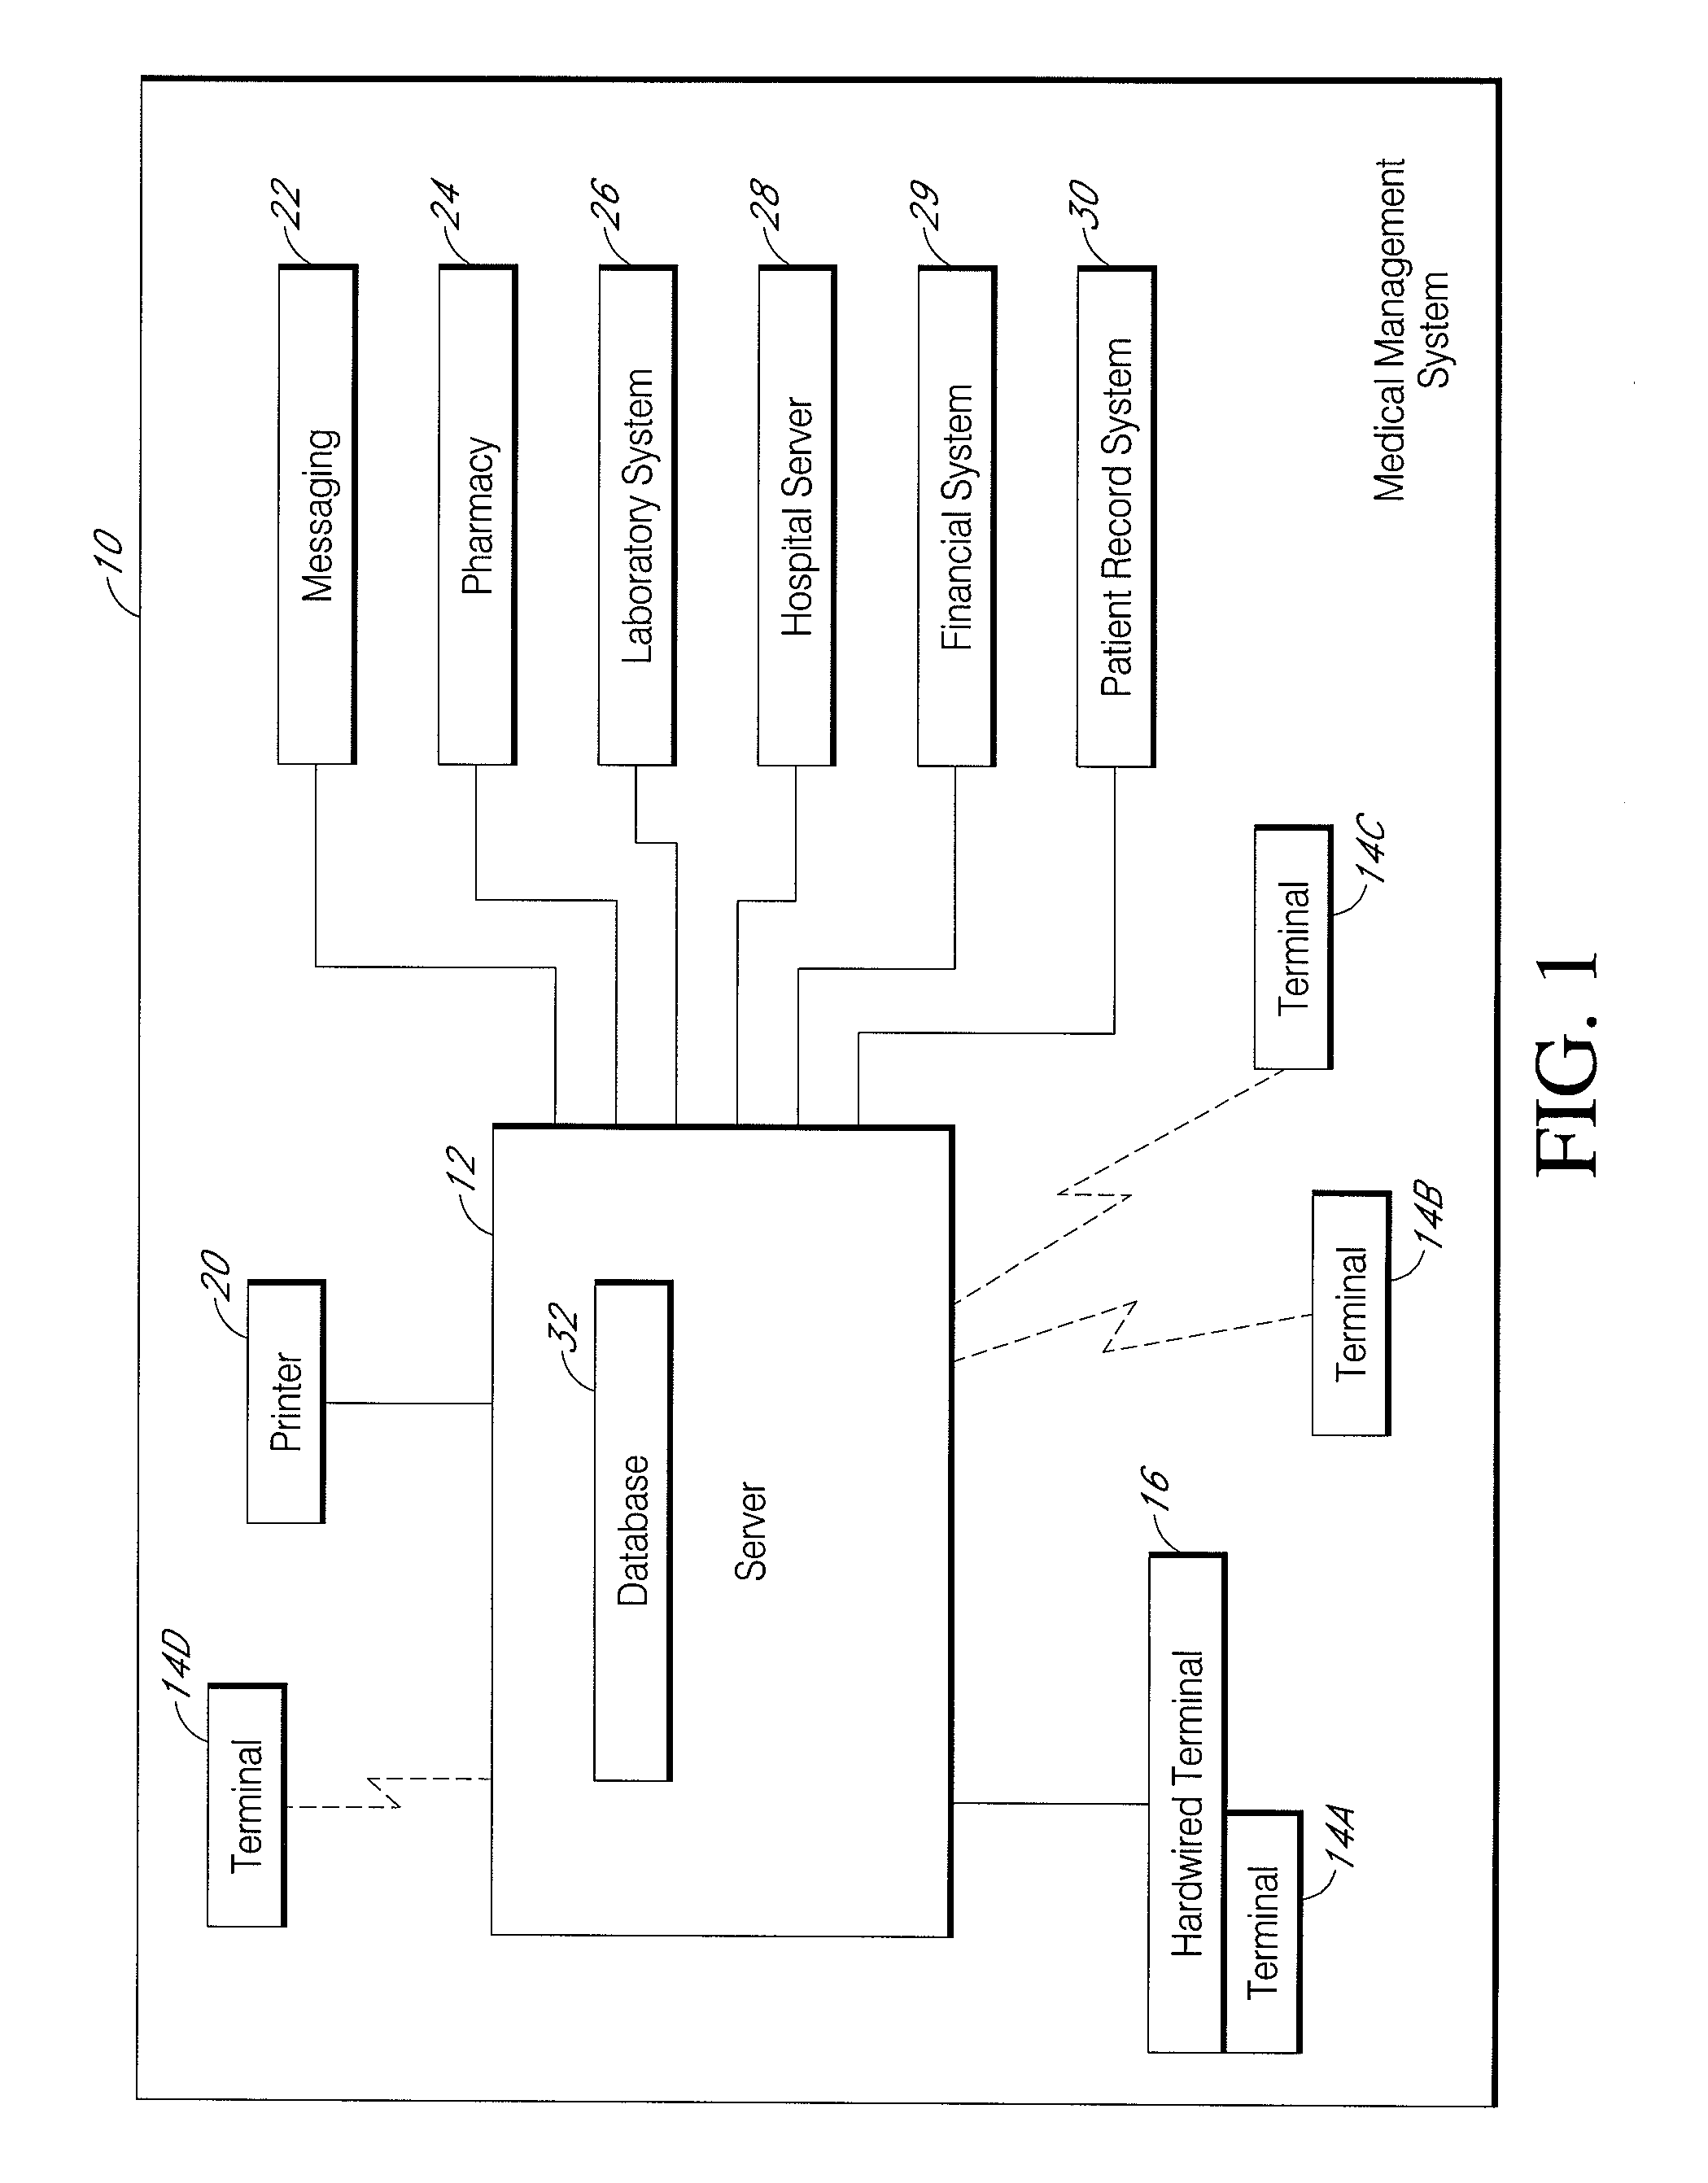 Electronic data capture in a medical workflow system